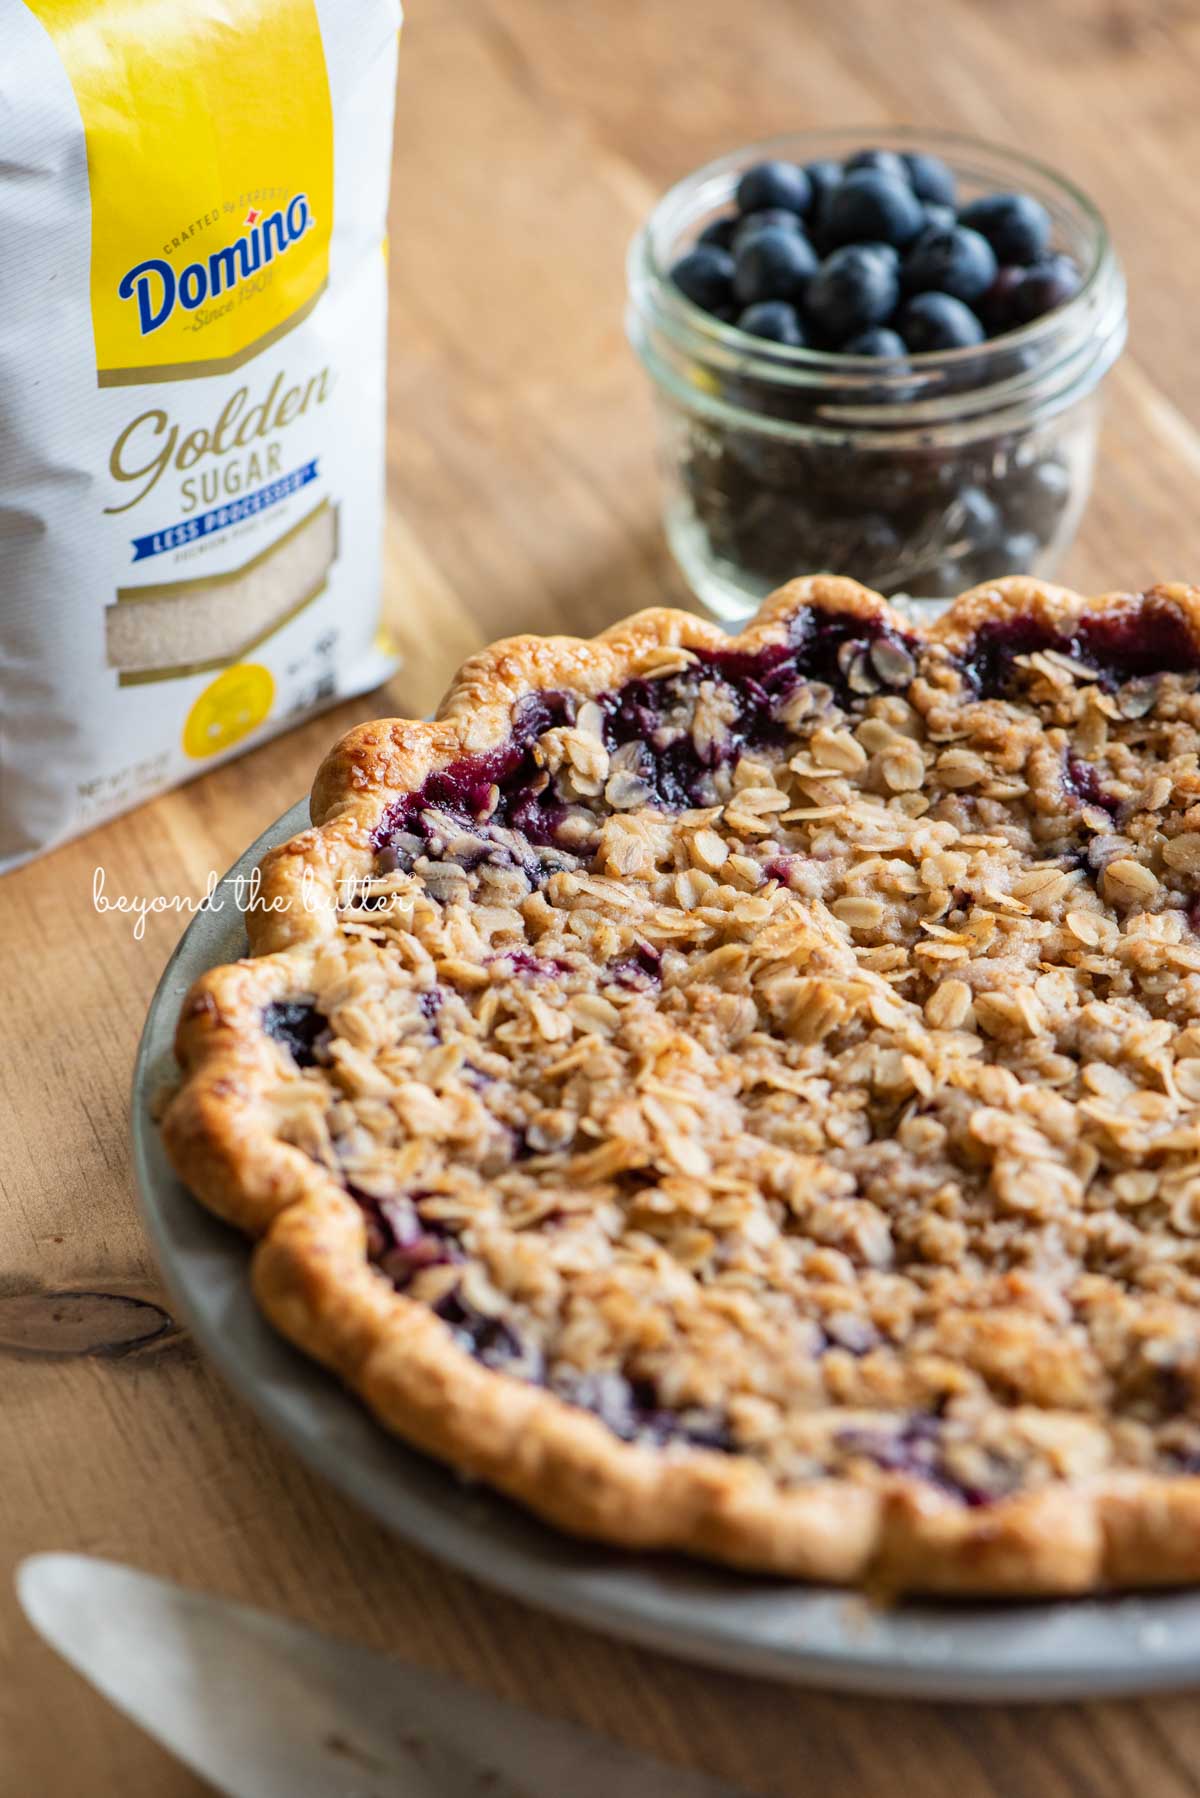 Just baked blueberry crumble pie made with Domino® Golden Sugar | © Beyond the Butter®